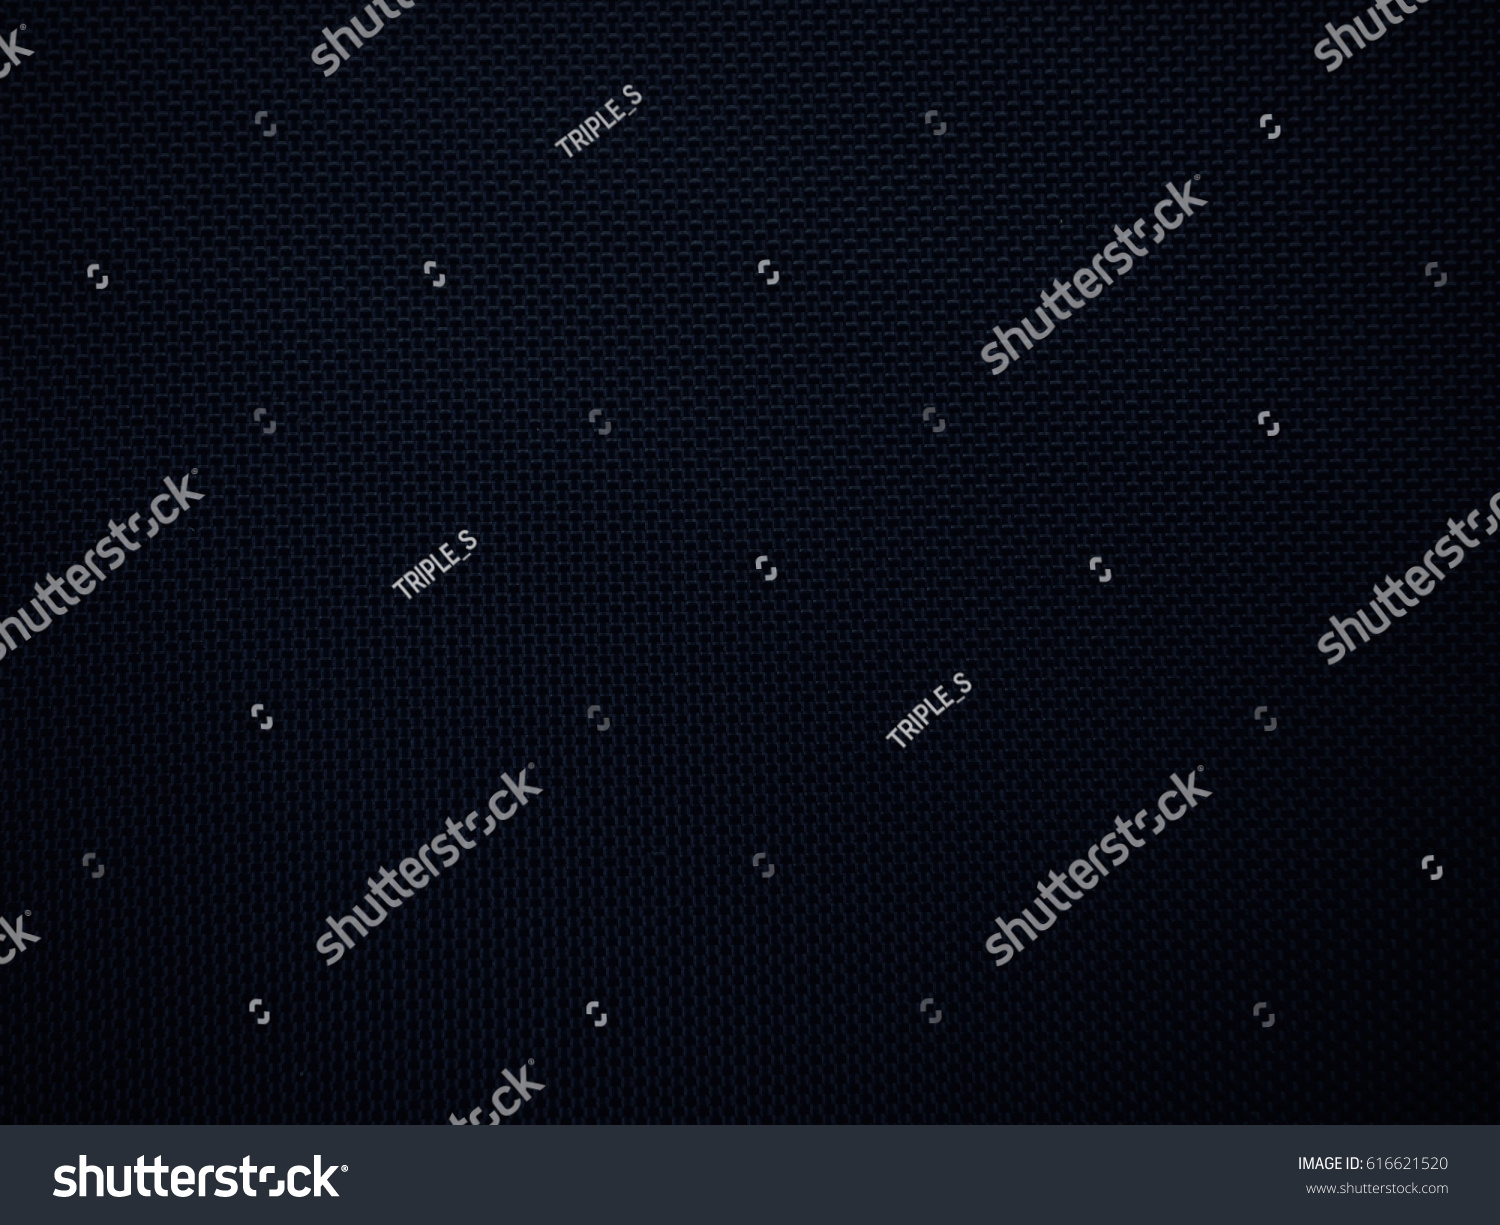 Abstract navy blue color texture on background #616621520